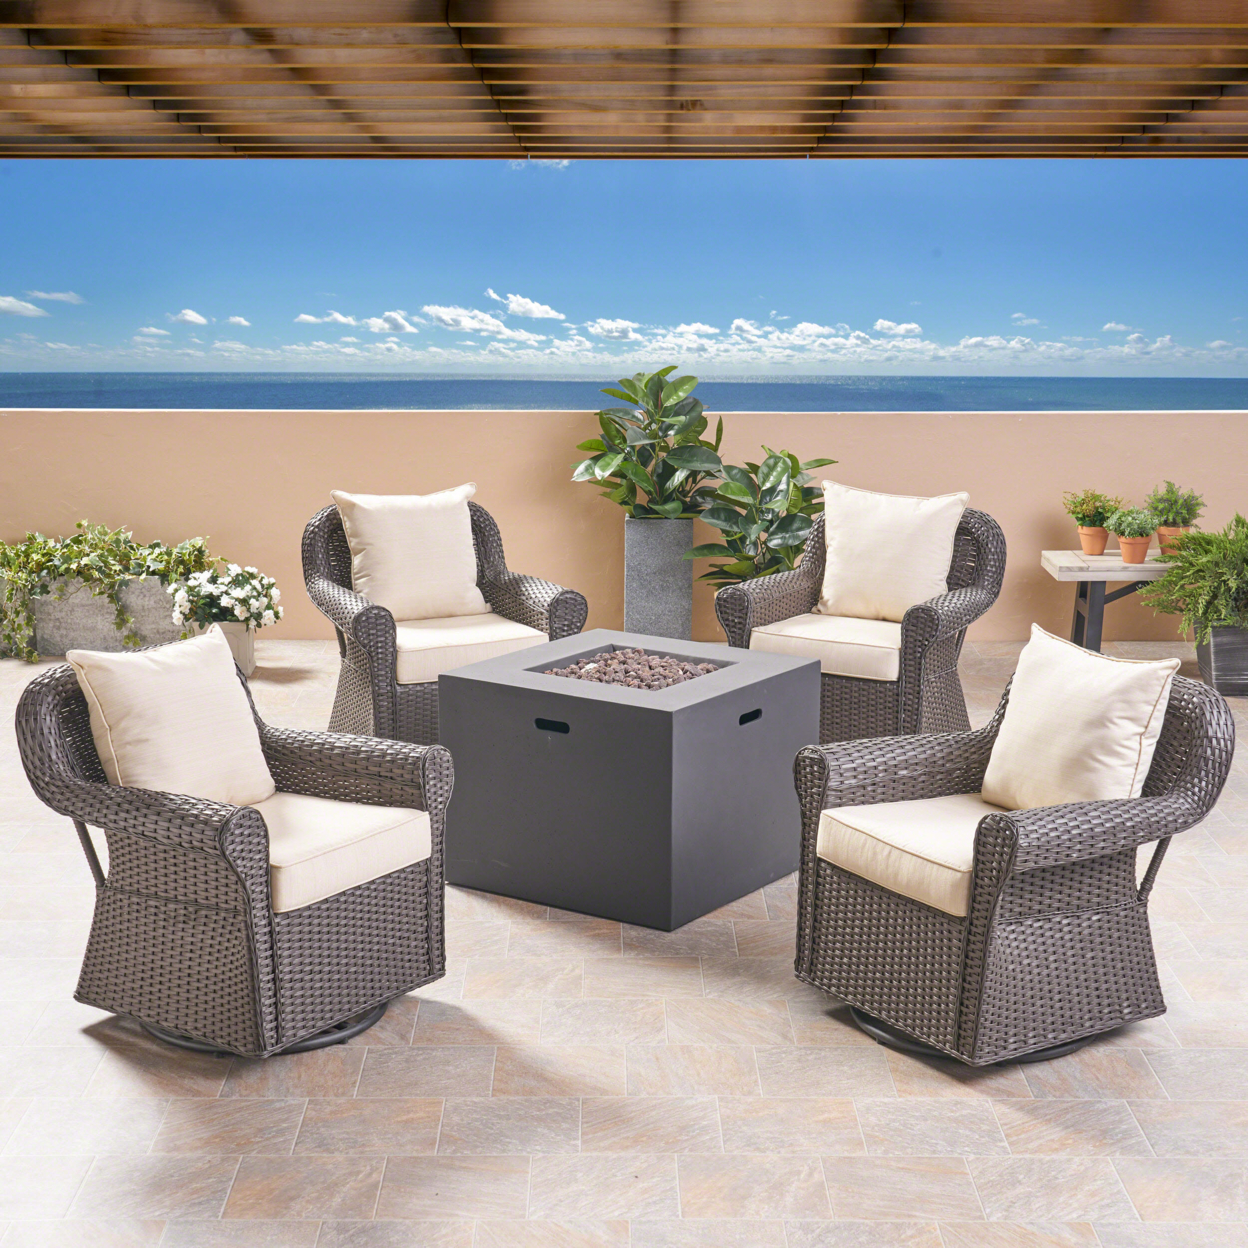 Bryson Outdoor 4 Piece Swivel Club Chair Set With Square Fire Pit - Light Gray